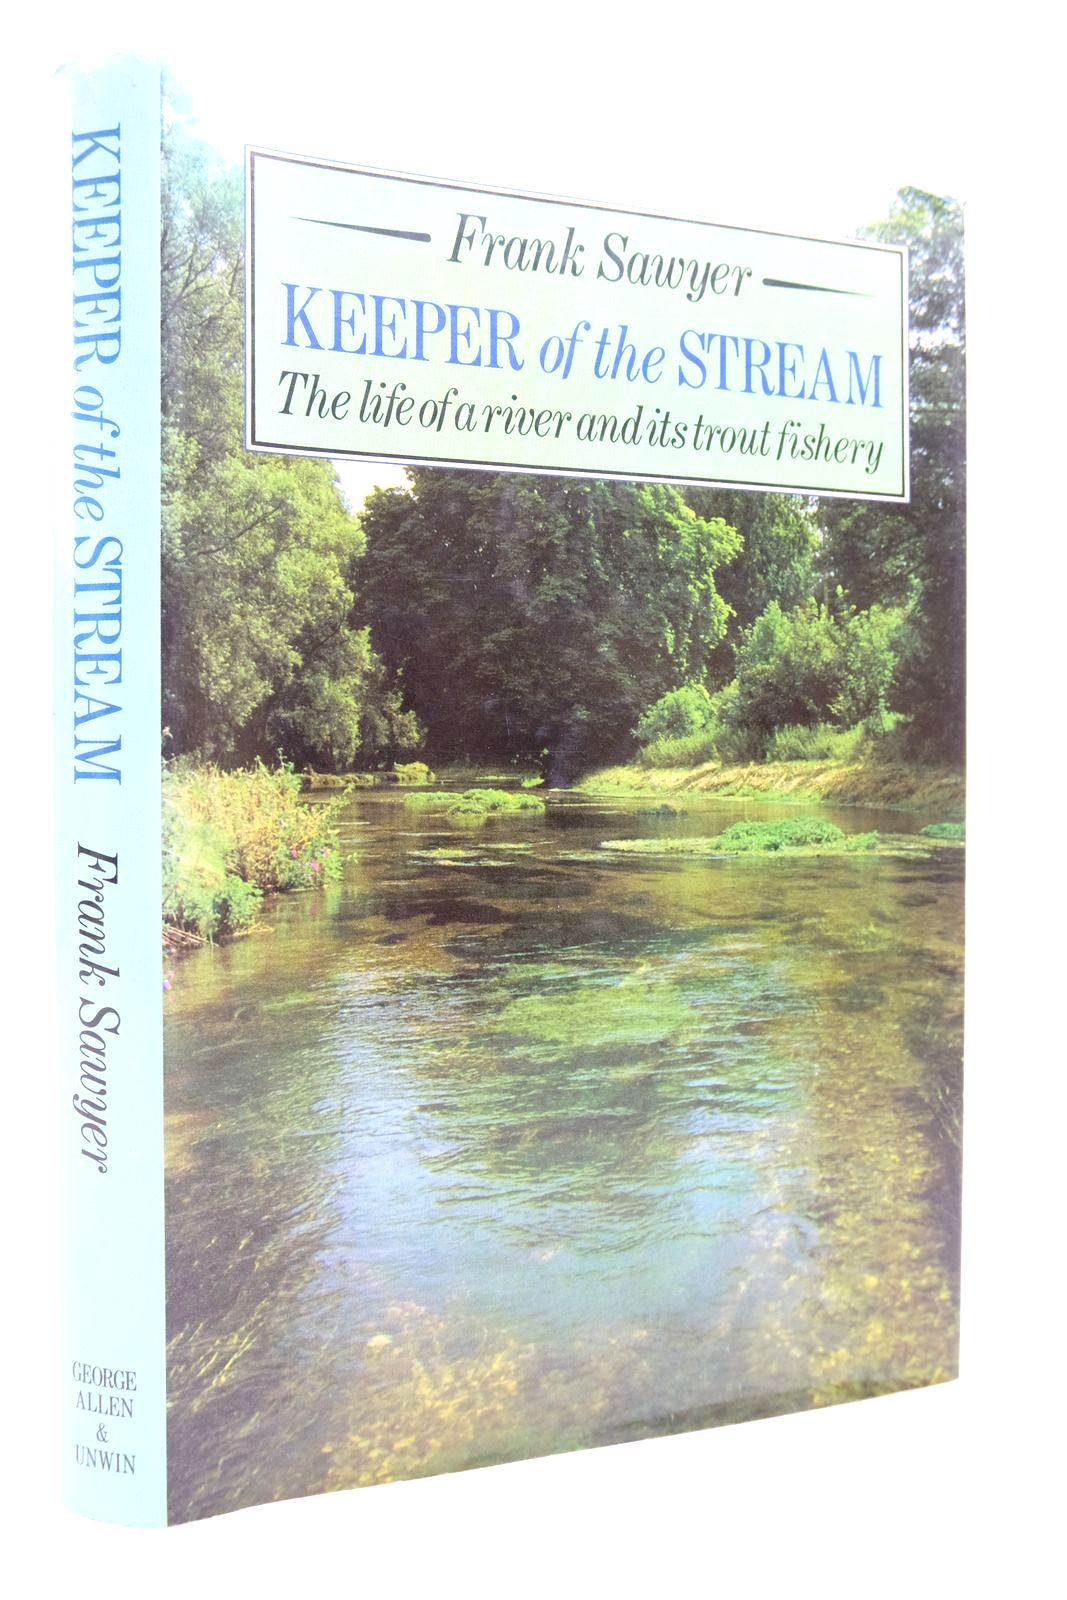 Photo of KEEPER OF THE STREAM written by Sawyer, Frank illustrated by Jardine, Charles published by George Allen & Unwin (STOCK CODE: 2140647)  for sale by Stella & Rose's Books